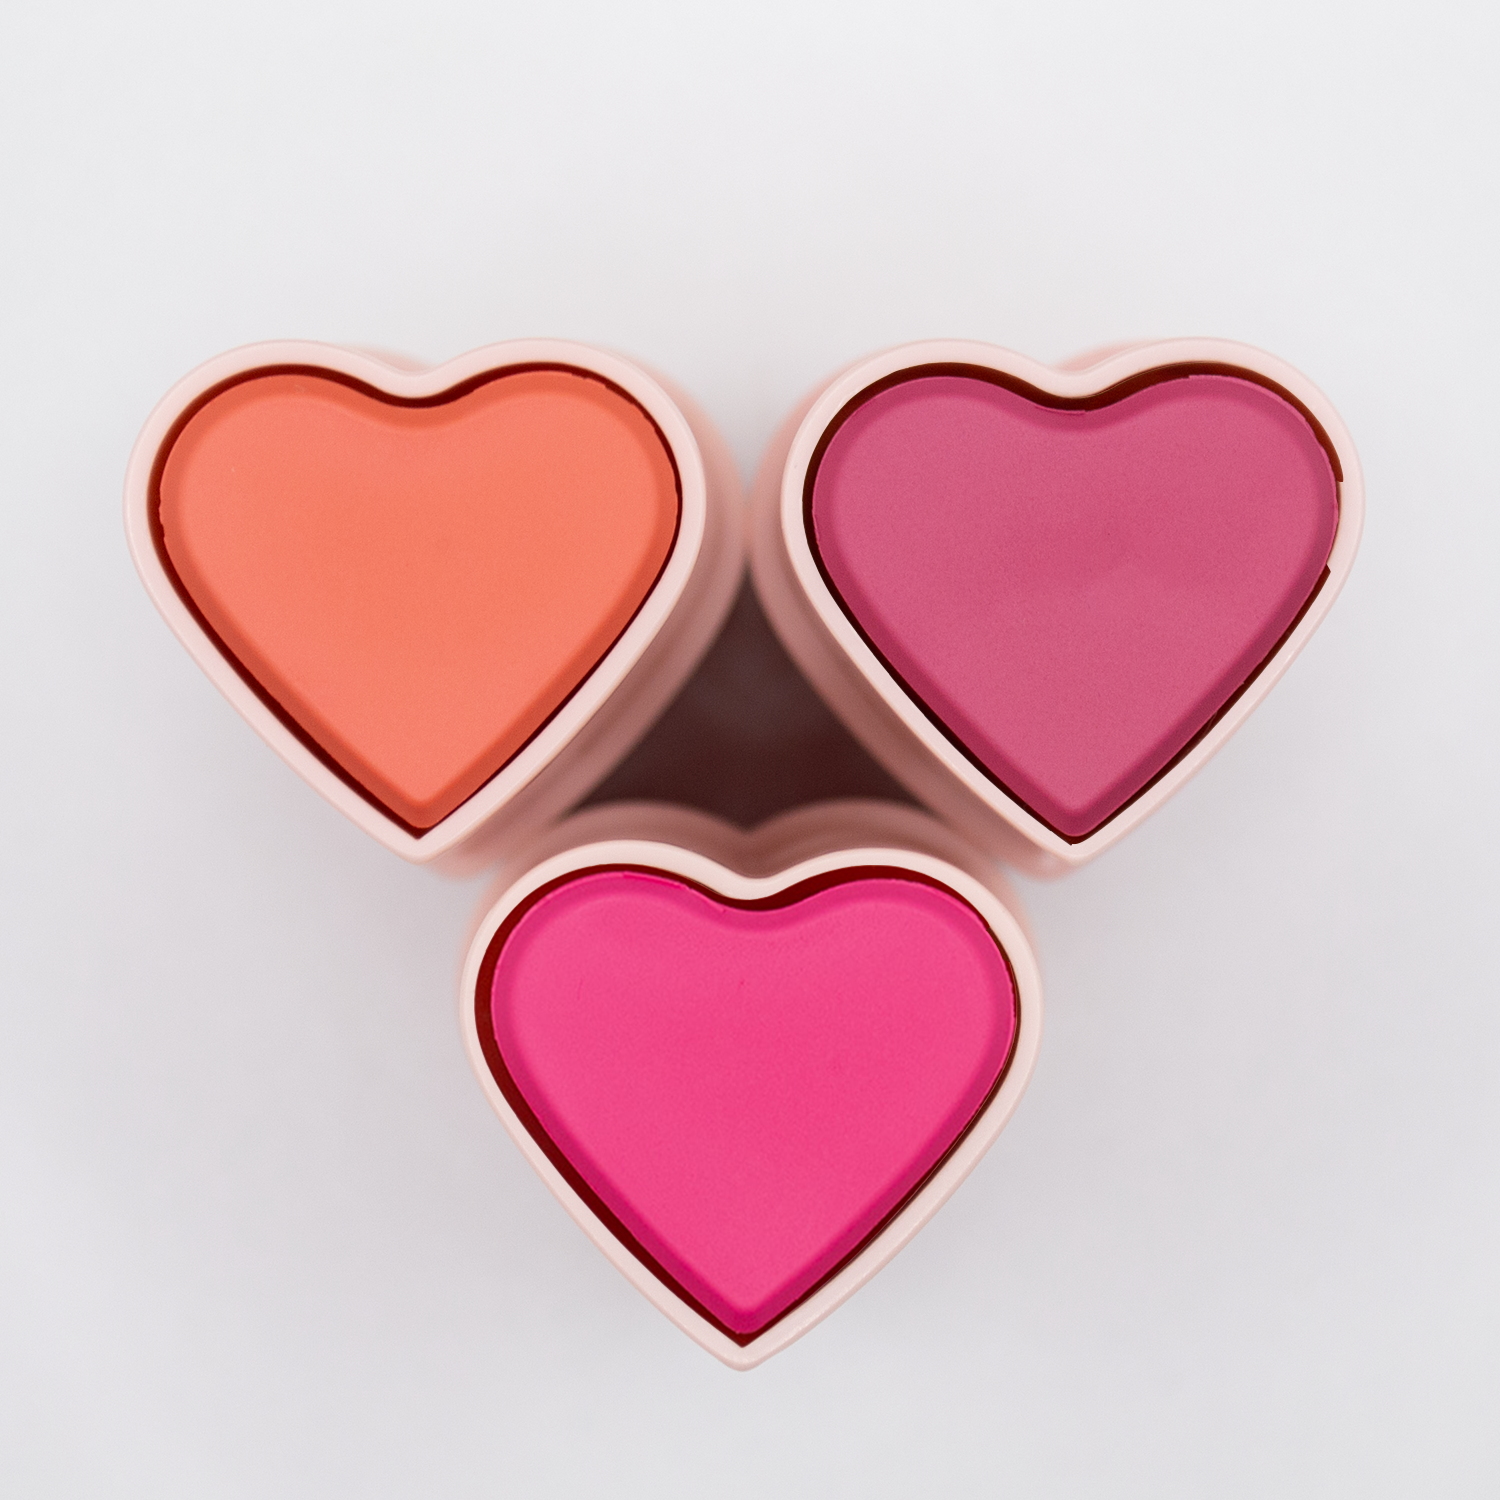 the happy hearts blush trio: shades confident coral, bold berry and protagonist pink